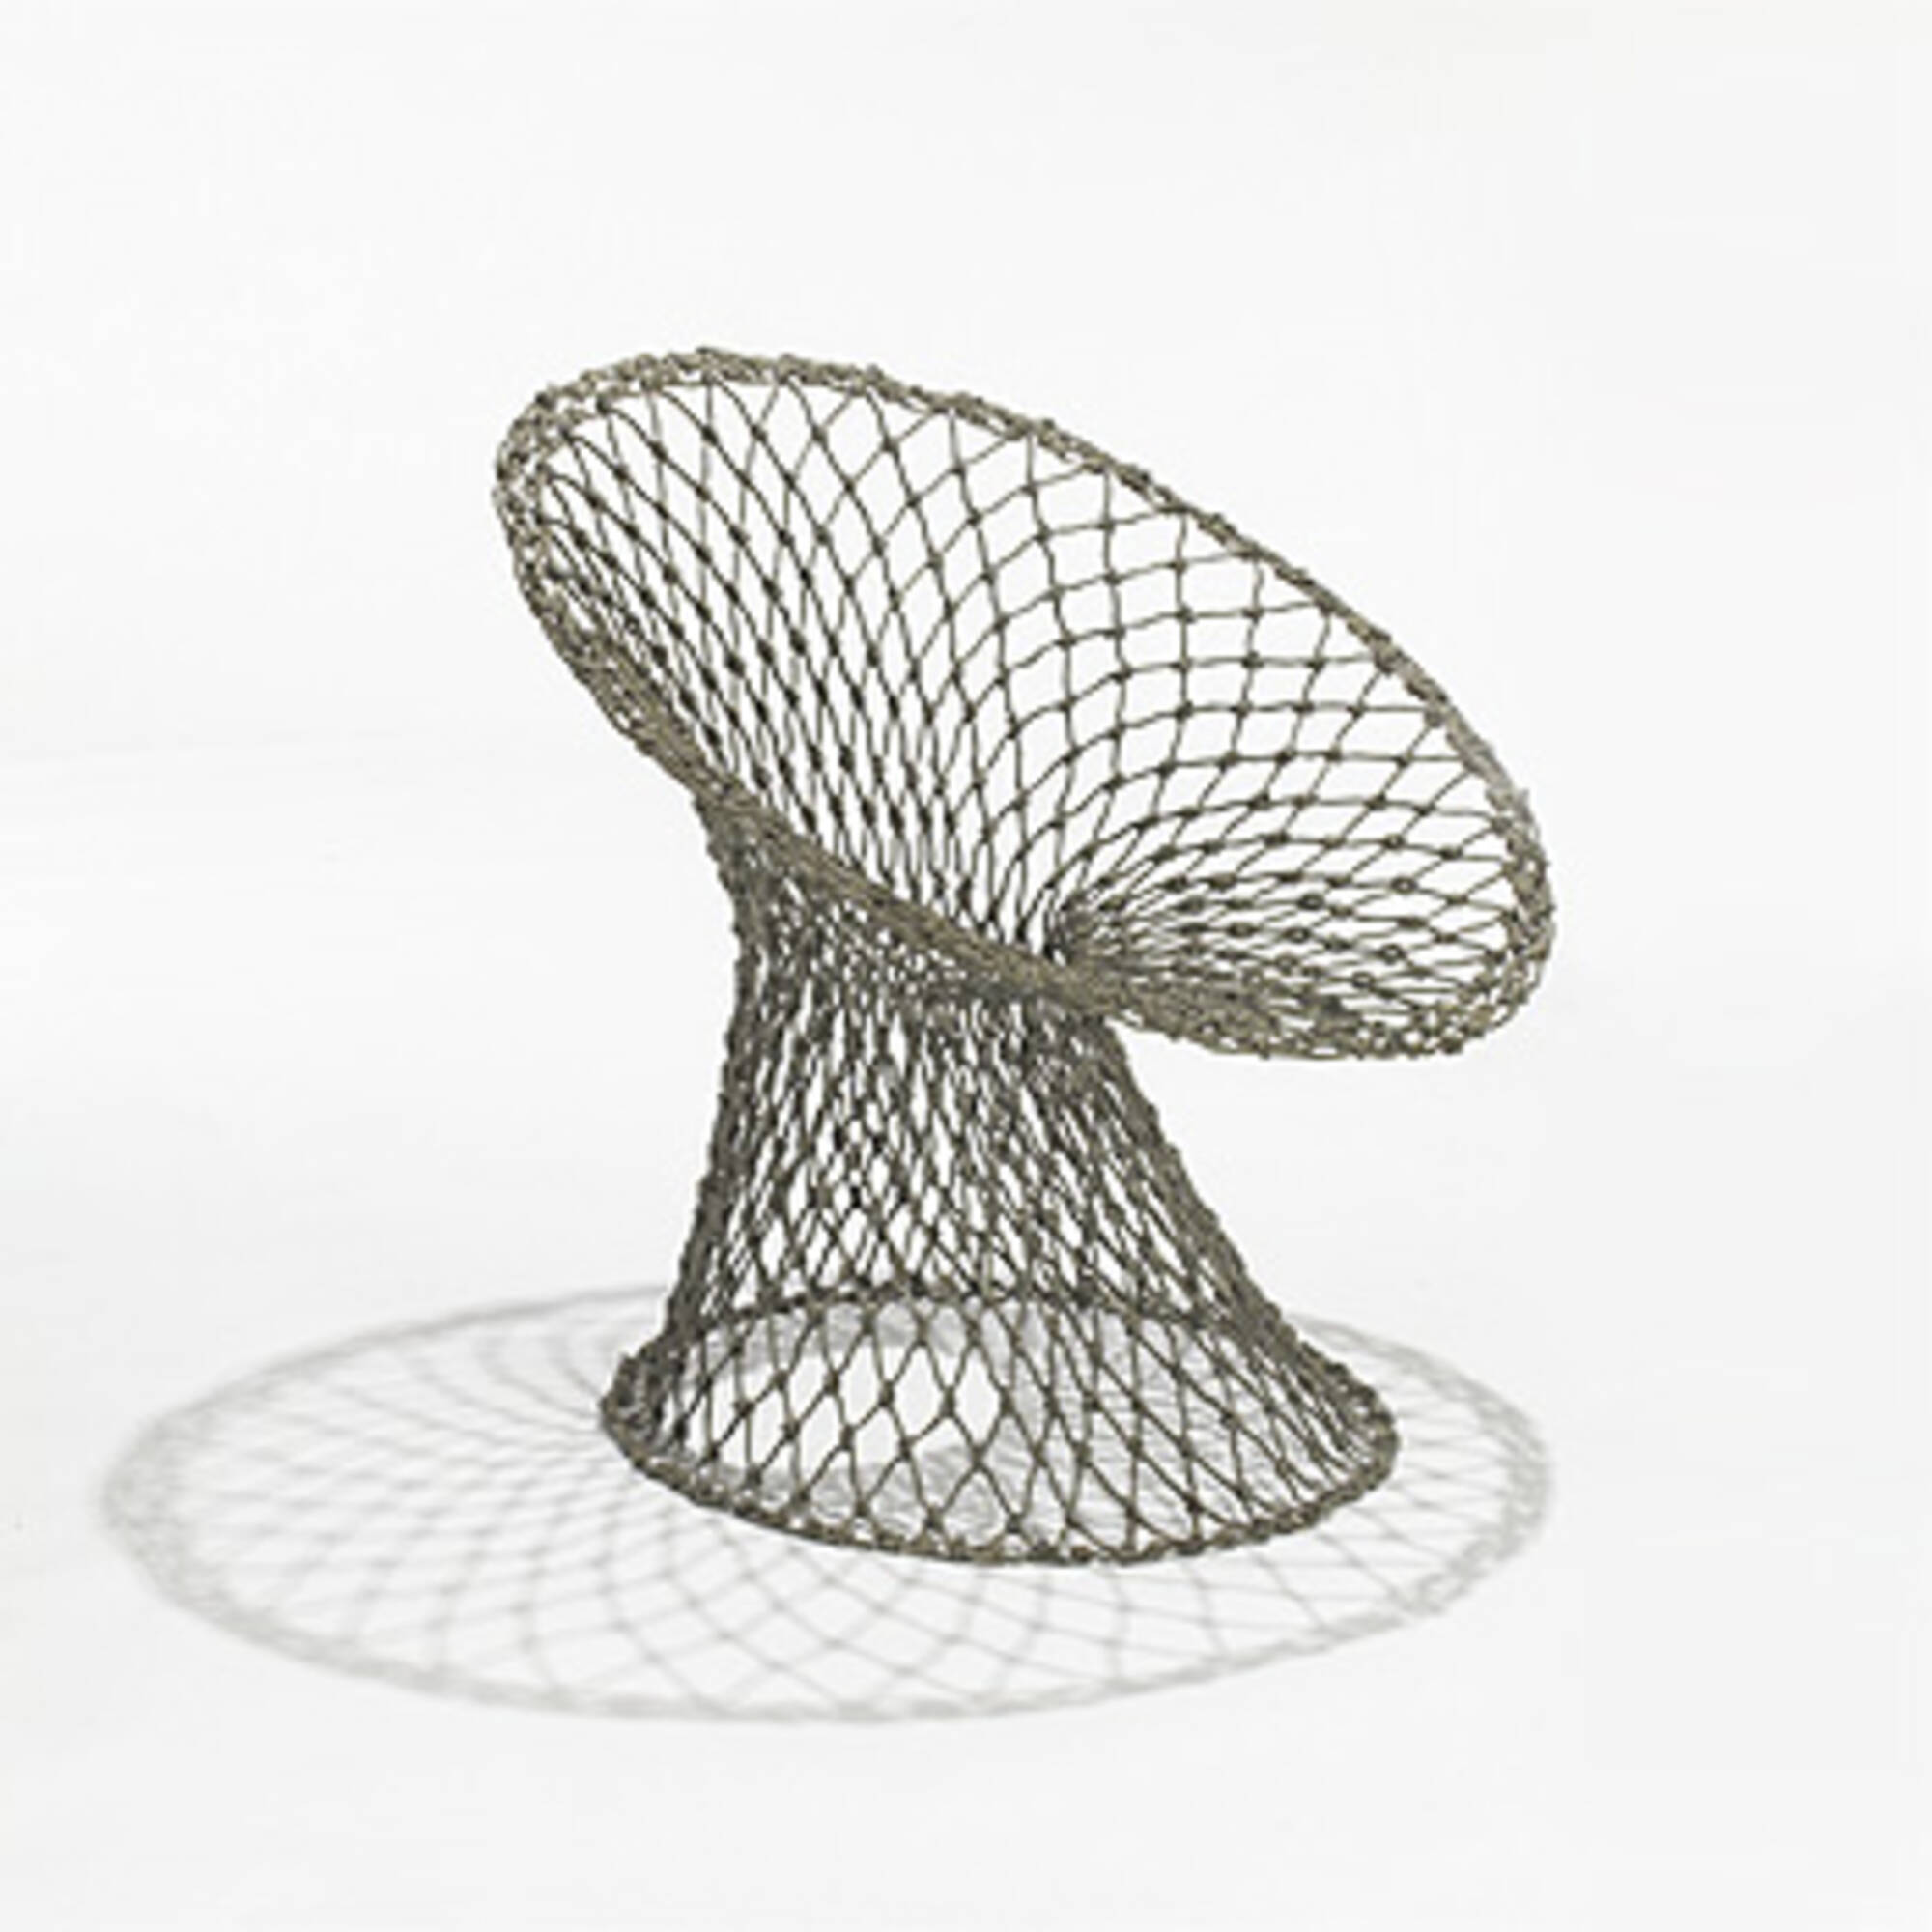 Knotted' Chair by Marcel Wanders for Droog Design, Netherlands